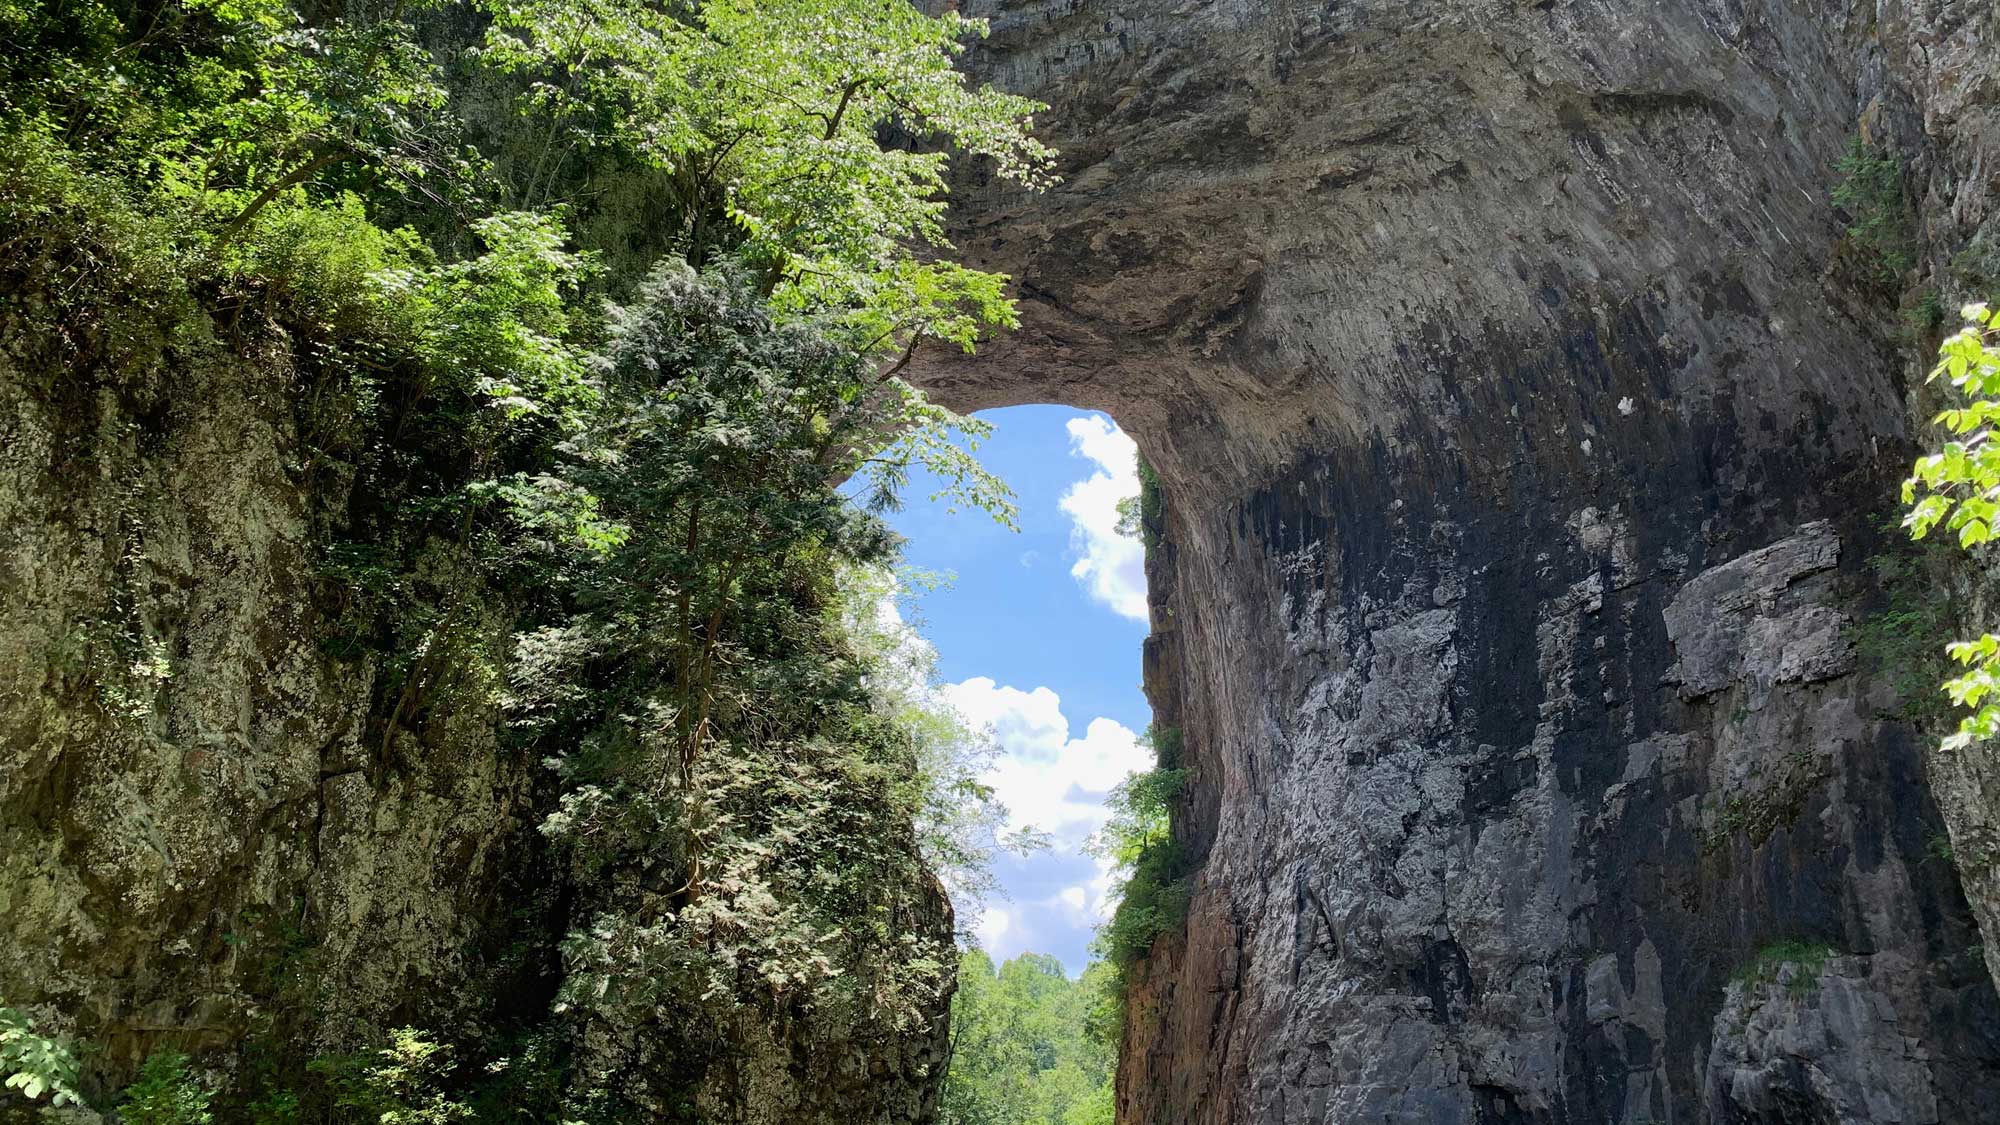 Photograph of Natural Bridge, a natural arch formed in Ordovician dolomite by erosion.